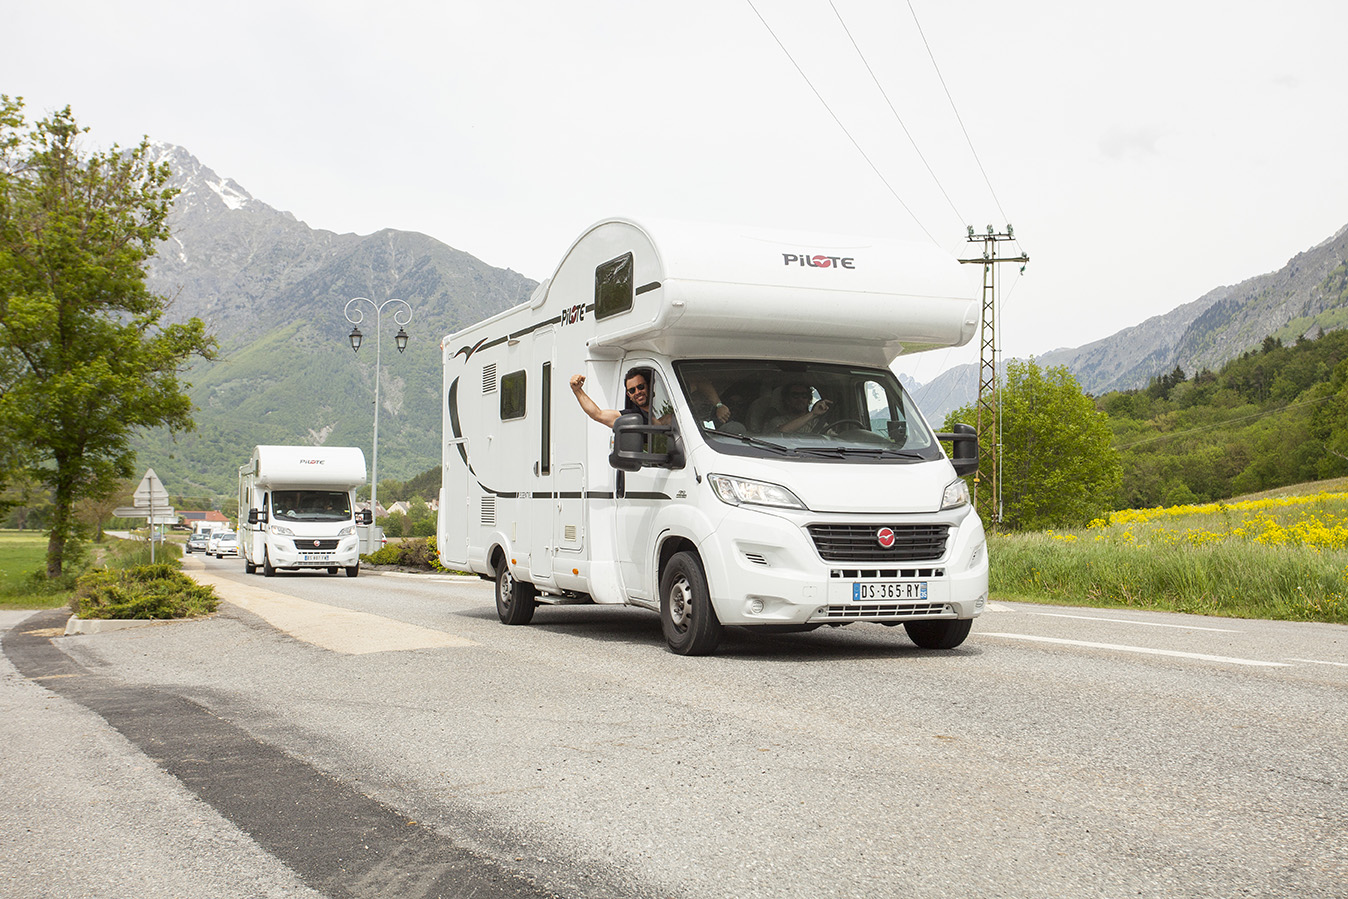 Renting or buying a motorhome? – main image